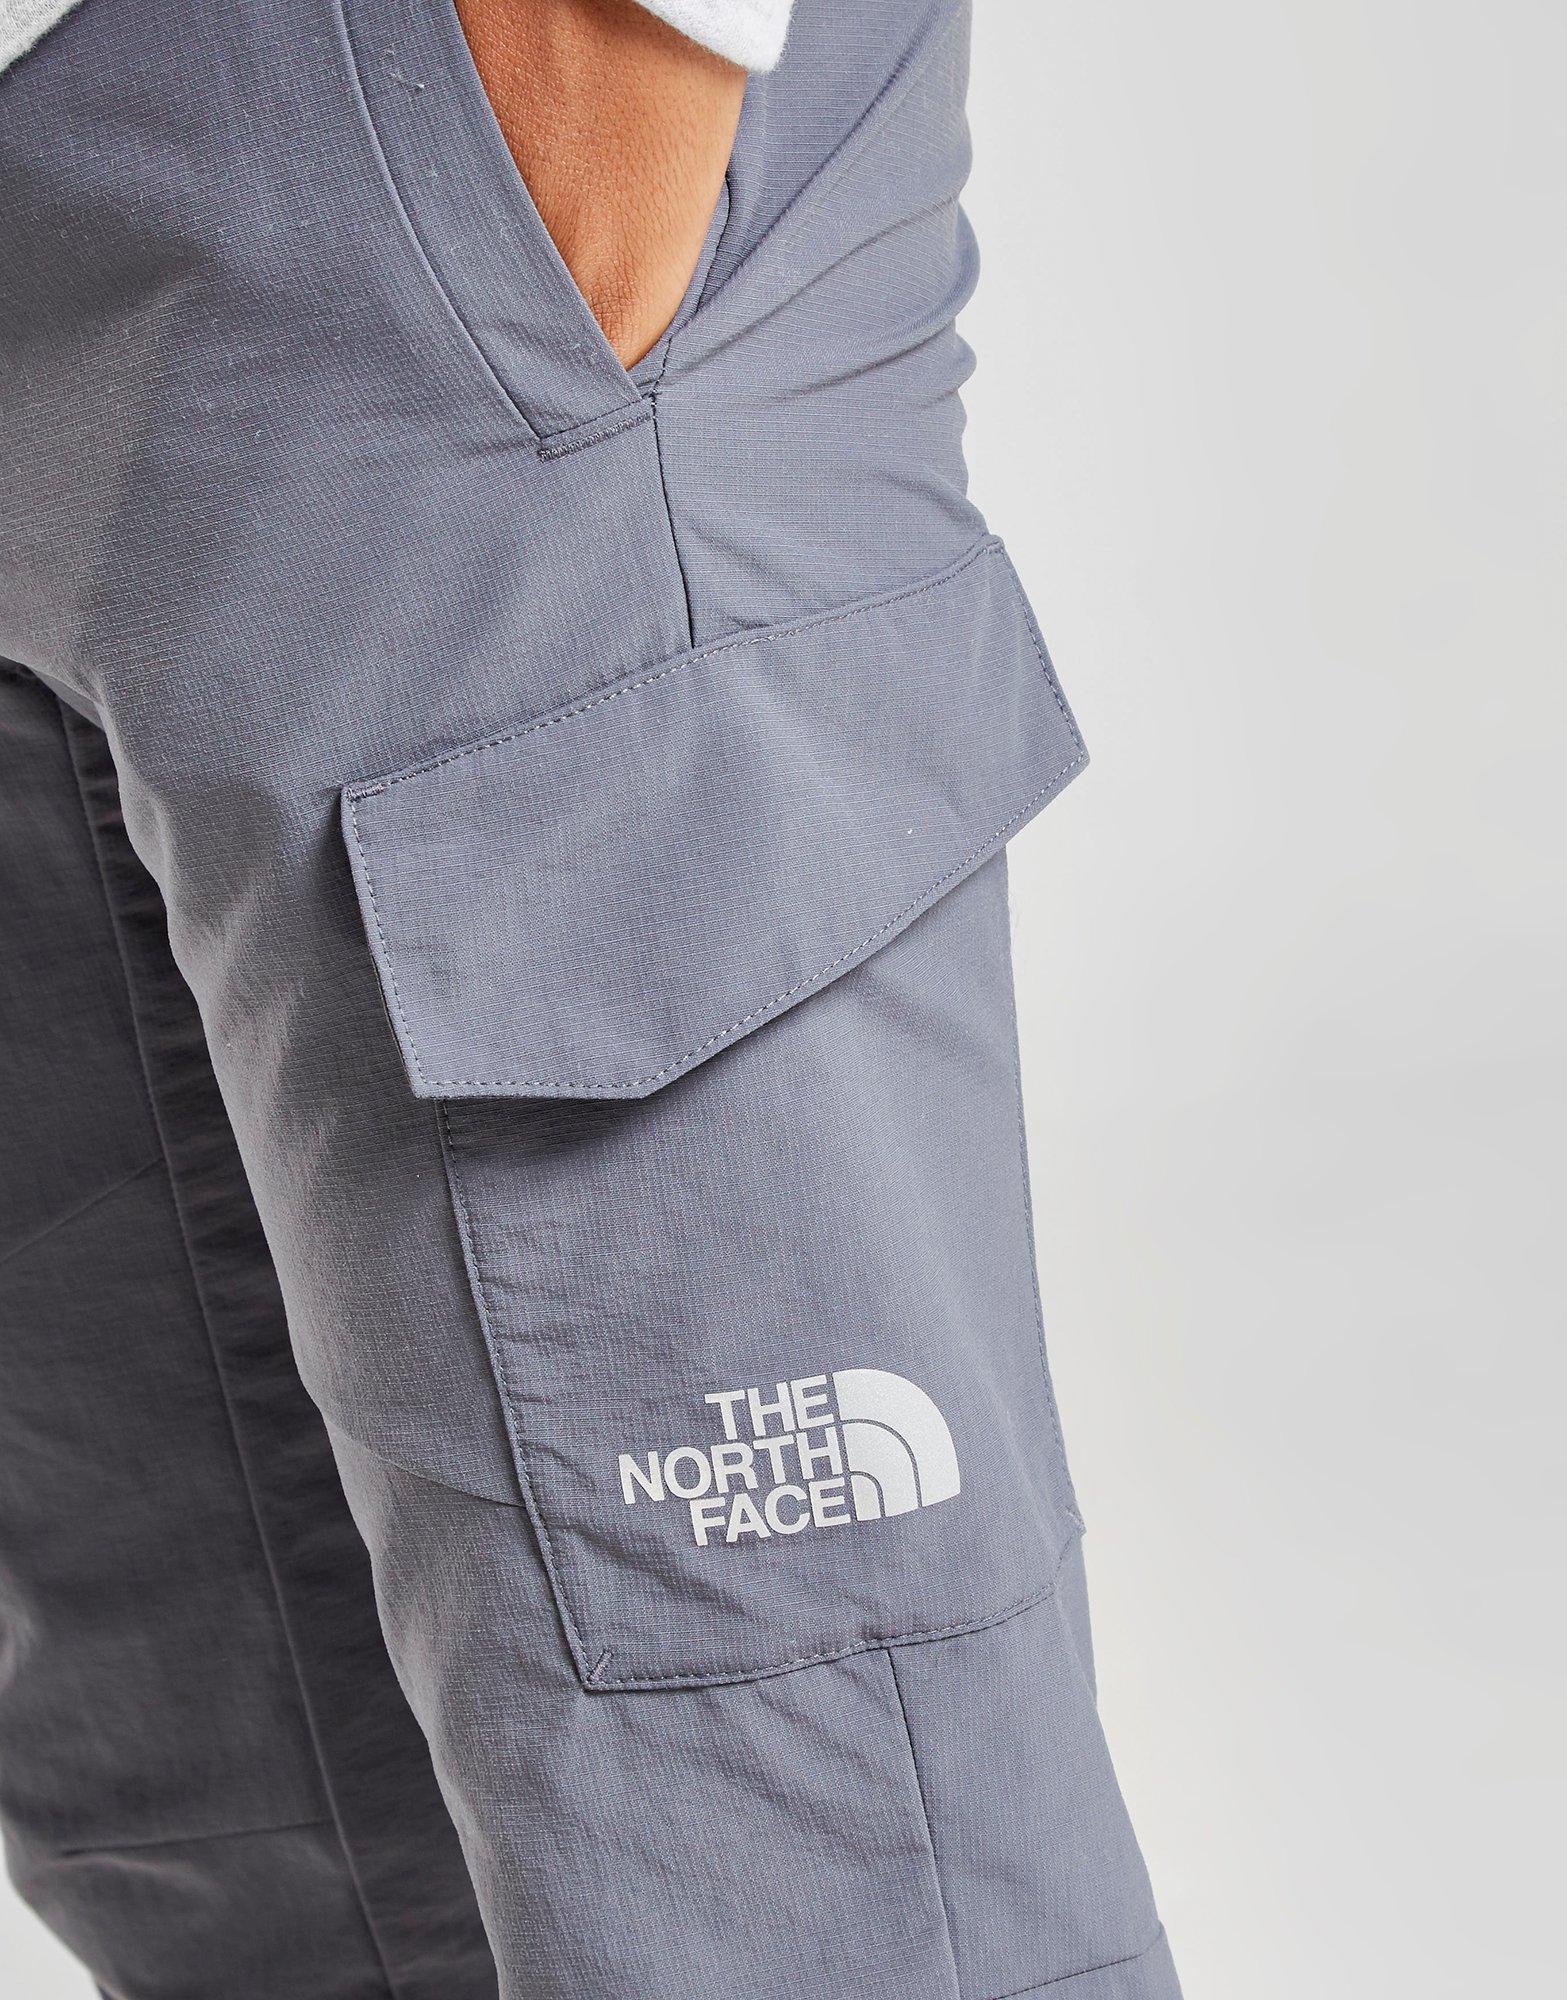 north face woven cargo pants mens